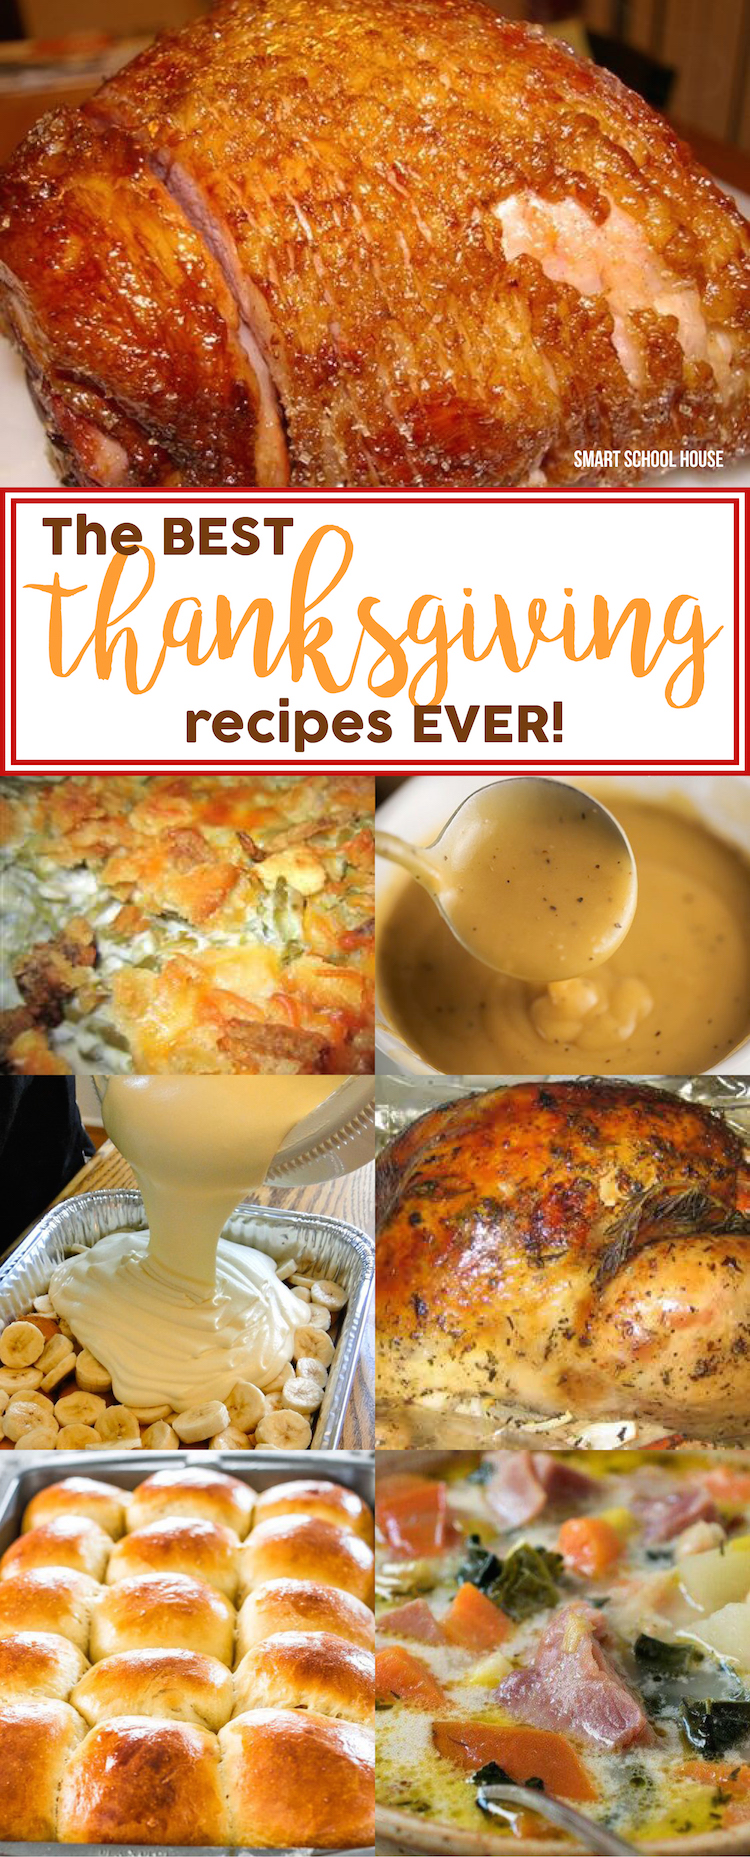 The BEST Thanksgiving recipes EVER! The best recipes for Thanksgiving turkey and stuffing, pumpkin pie, mashed potatoes, gravy, and tips to help you along the way.